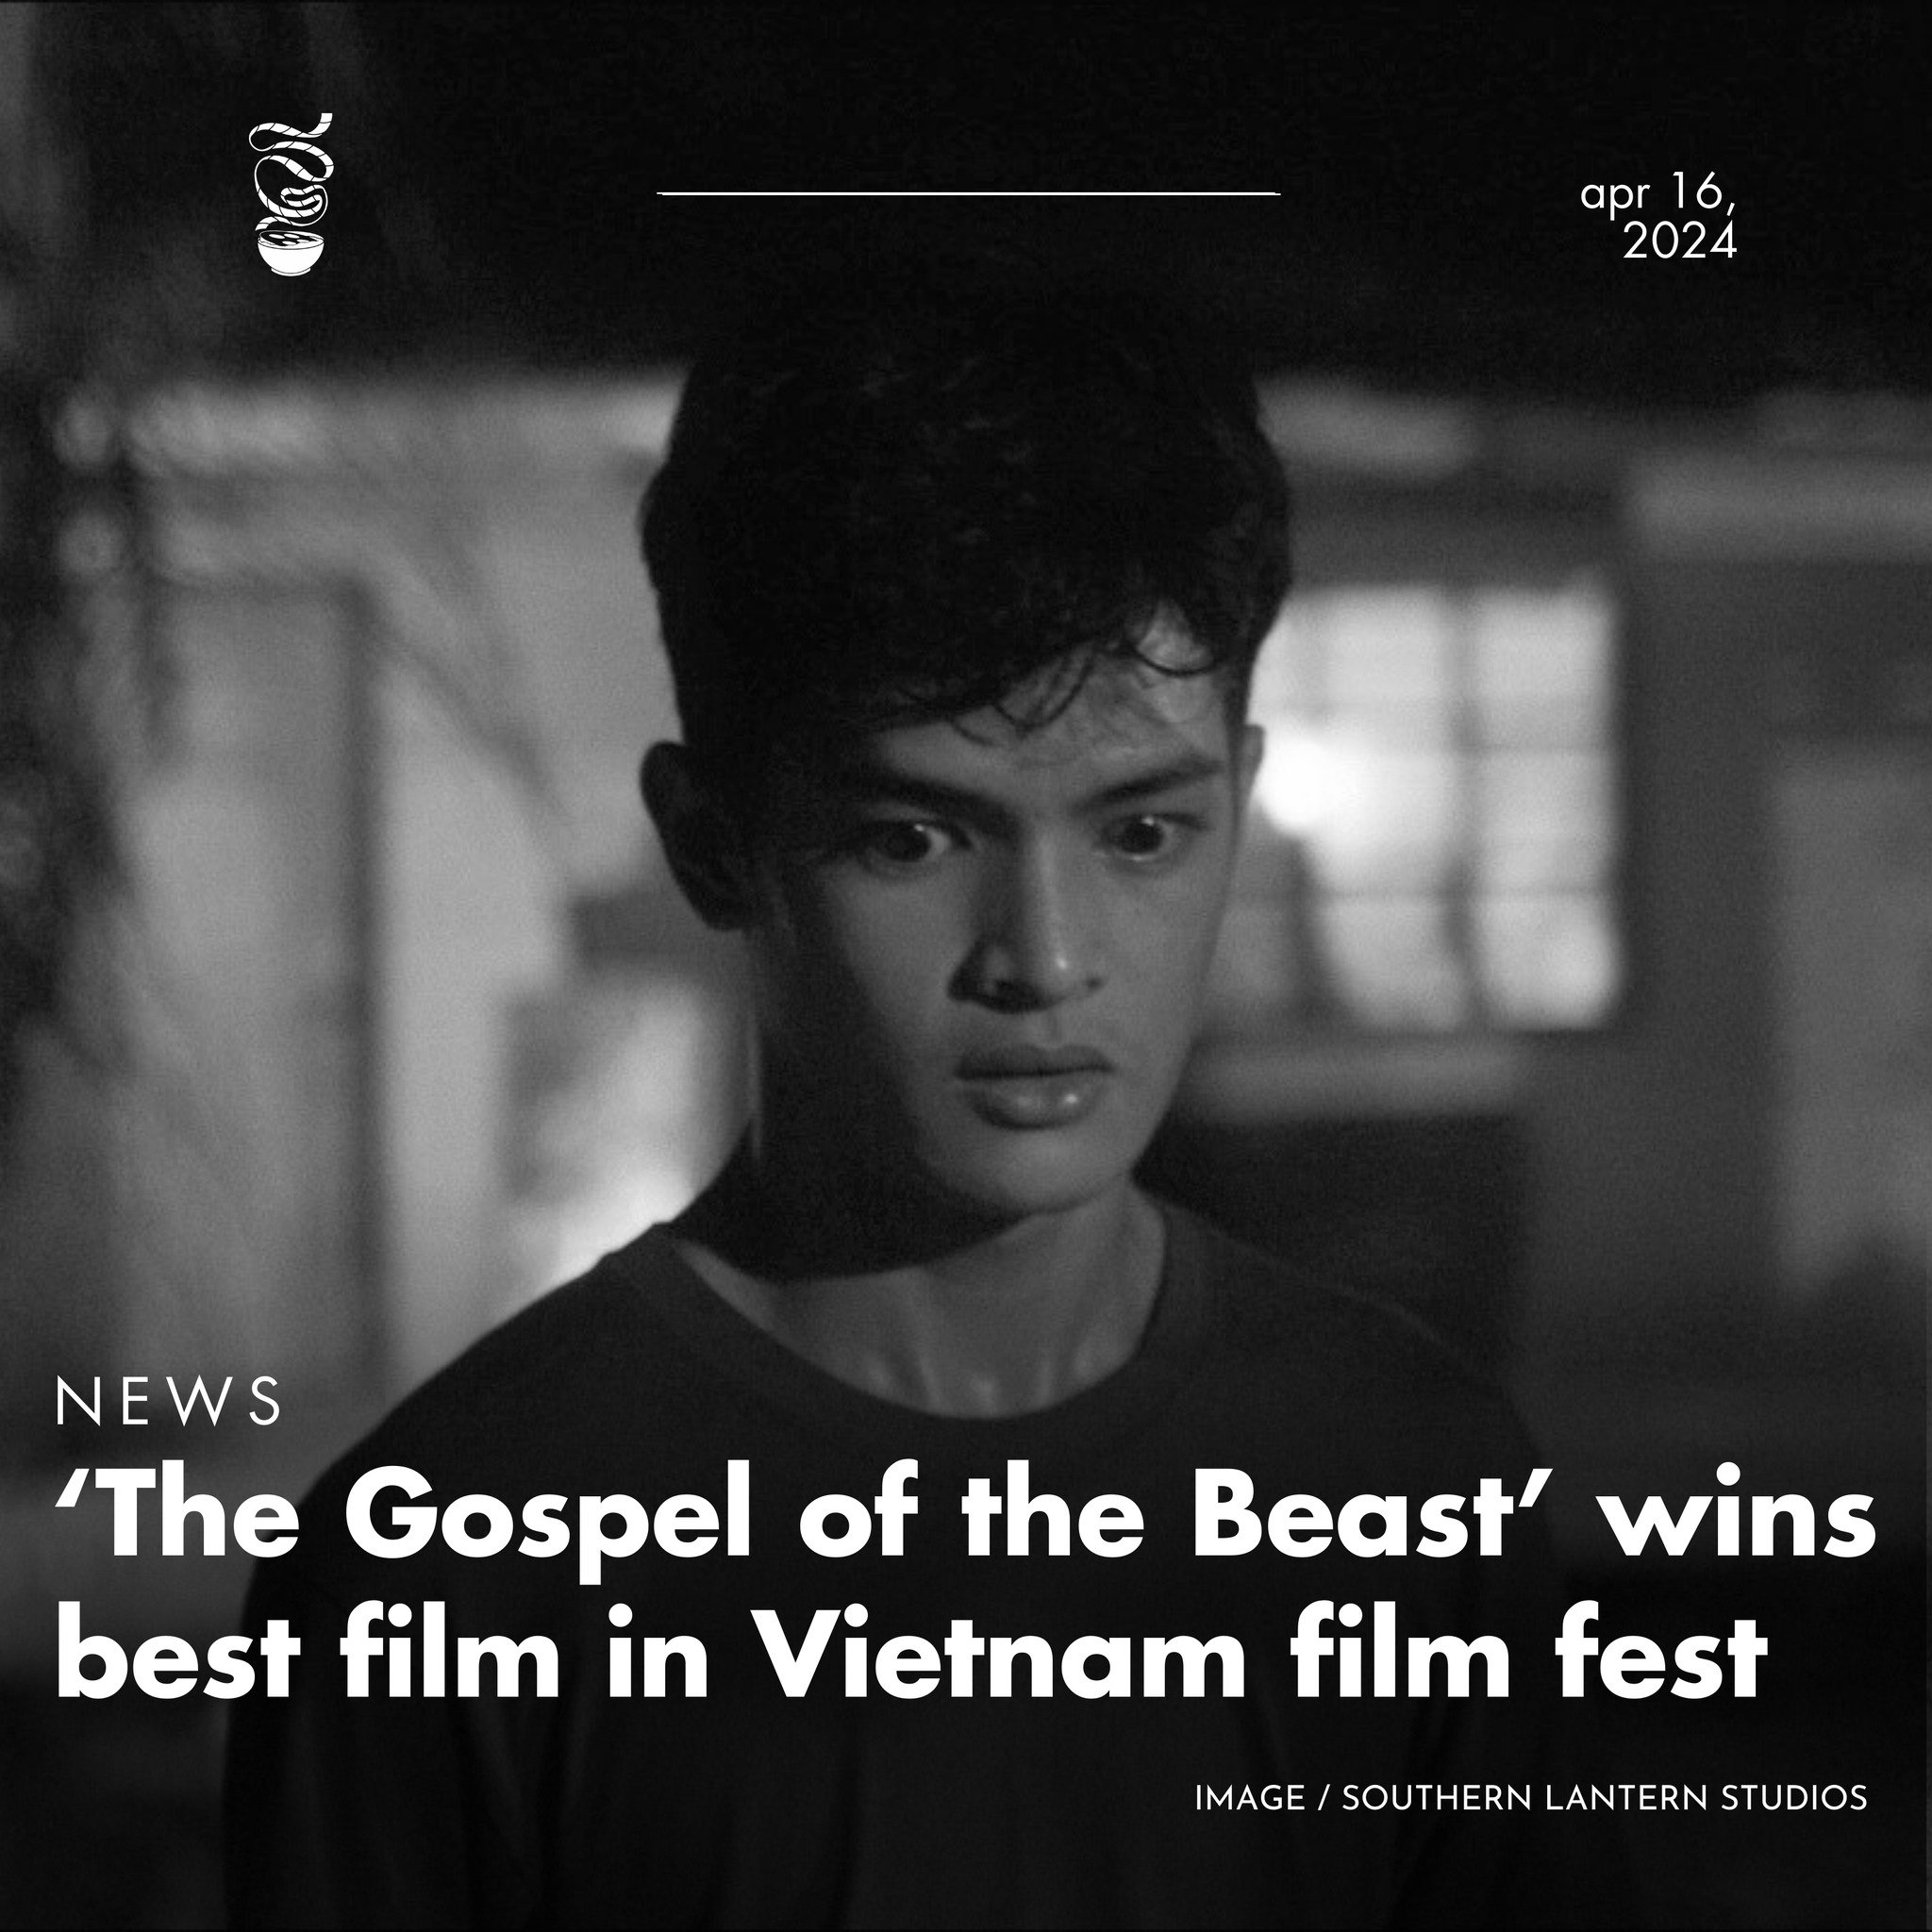 Sheron Dayoc&rsquo;s &lsquo;The Gospel of the Beast&rsquo; won Best Feature Film at the 1st Ho Chi Minh City International Film Festival in Vietnam.

Produced by Southern Lantern Studios, the film stars Jansen Magpusao and Ronnie Lazaro and follows a